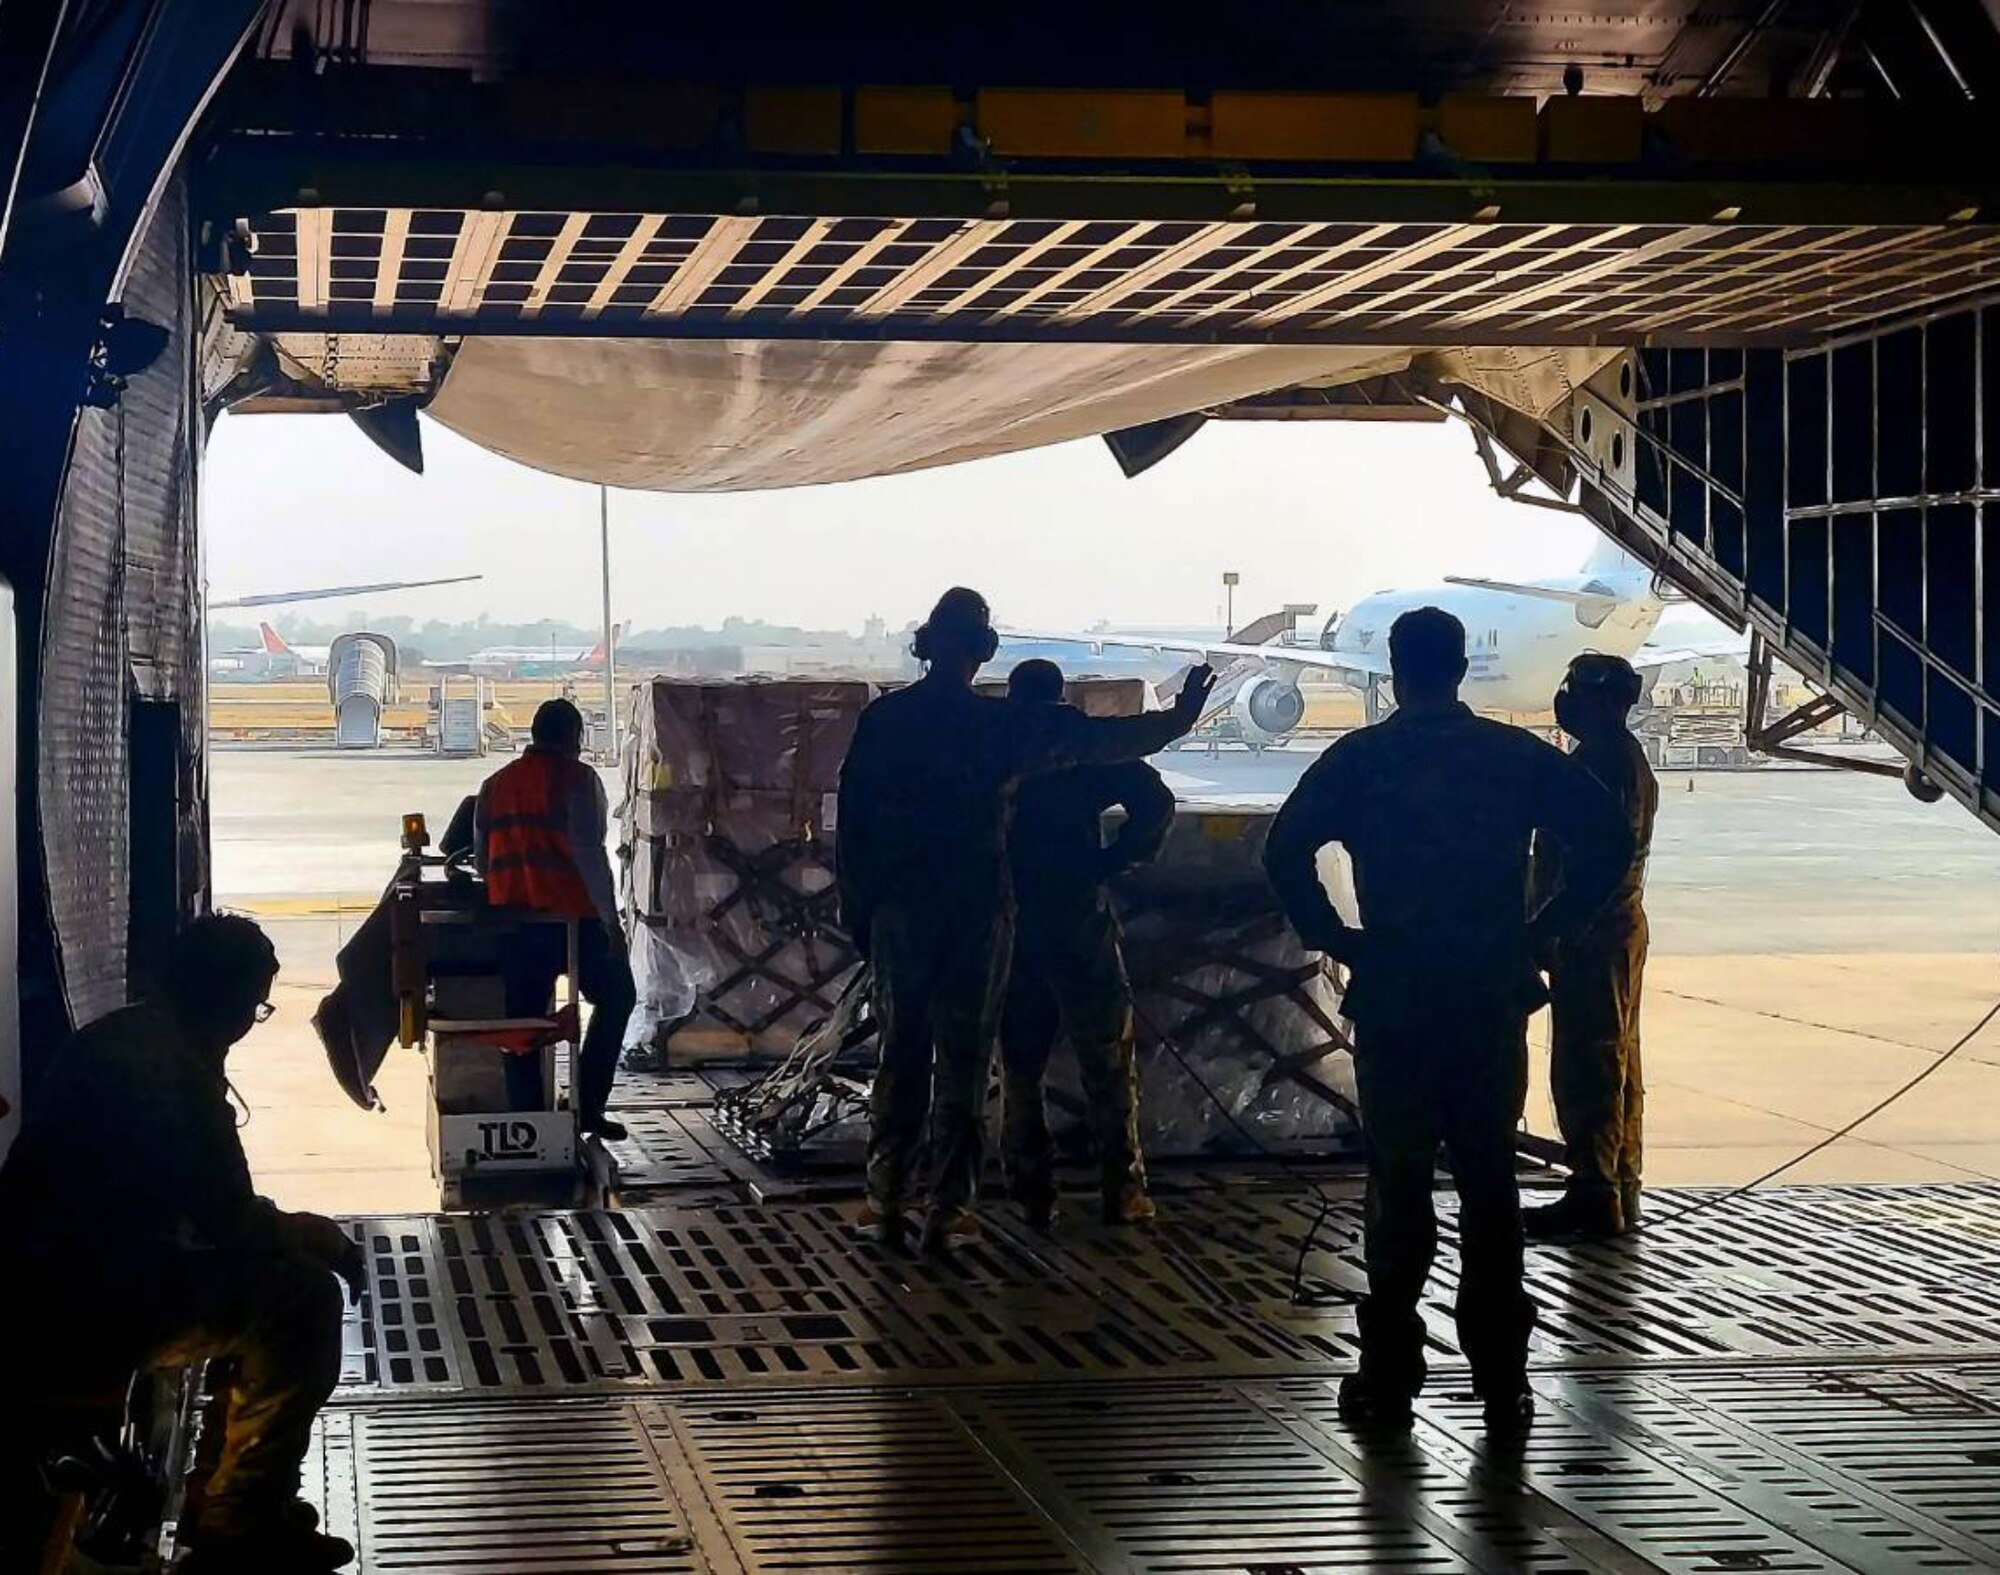 Reserve Citizen Airmen with the 433rd Airlift Wing from Joint Base San Antonio-Lackland work with ground crews at the airport in New Delhi, India.